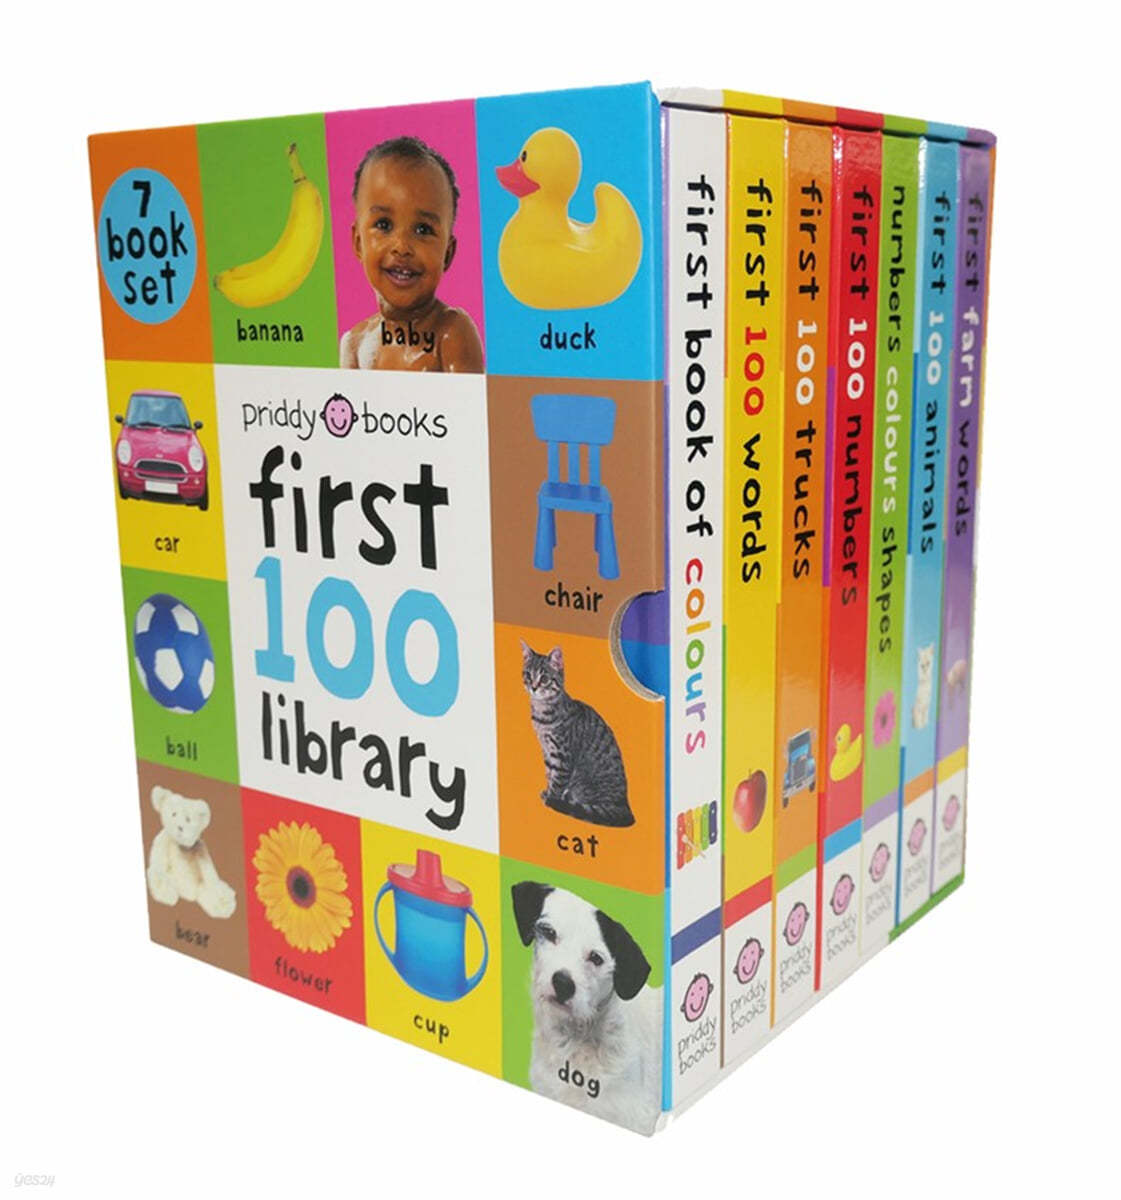 First 100 7-book Library (Unpadded covers)